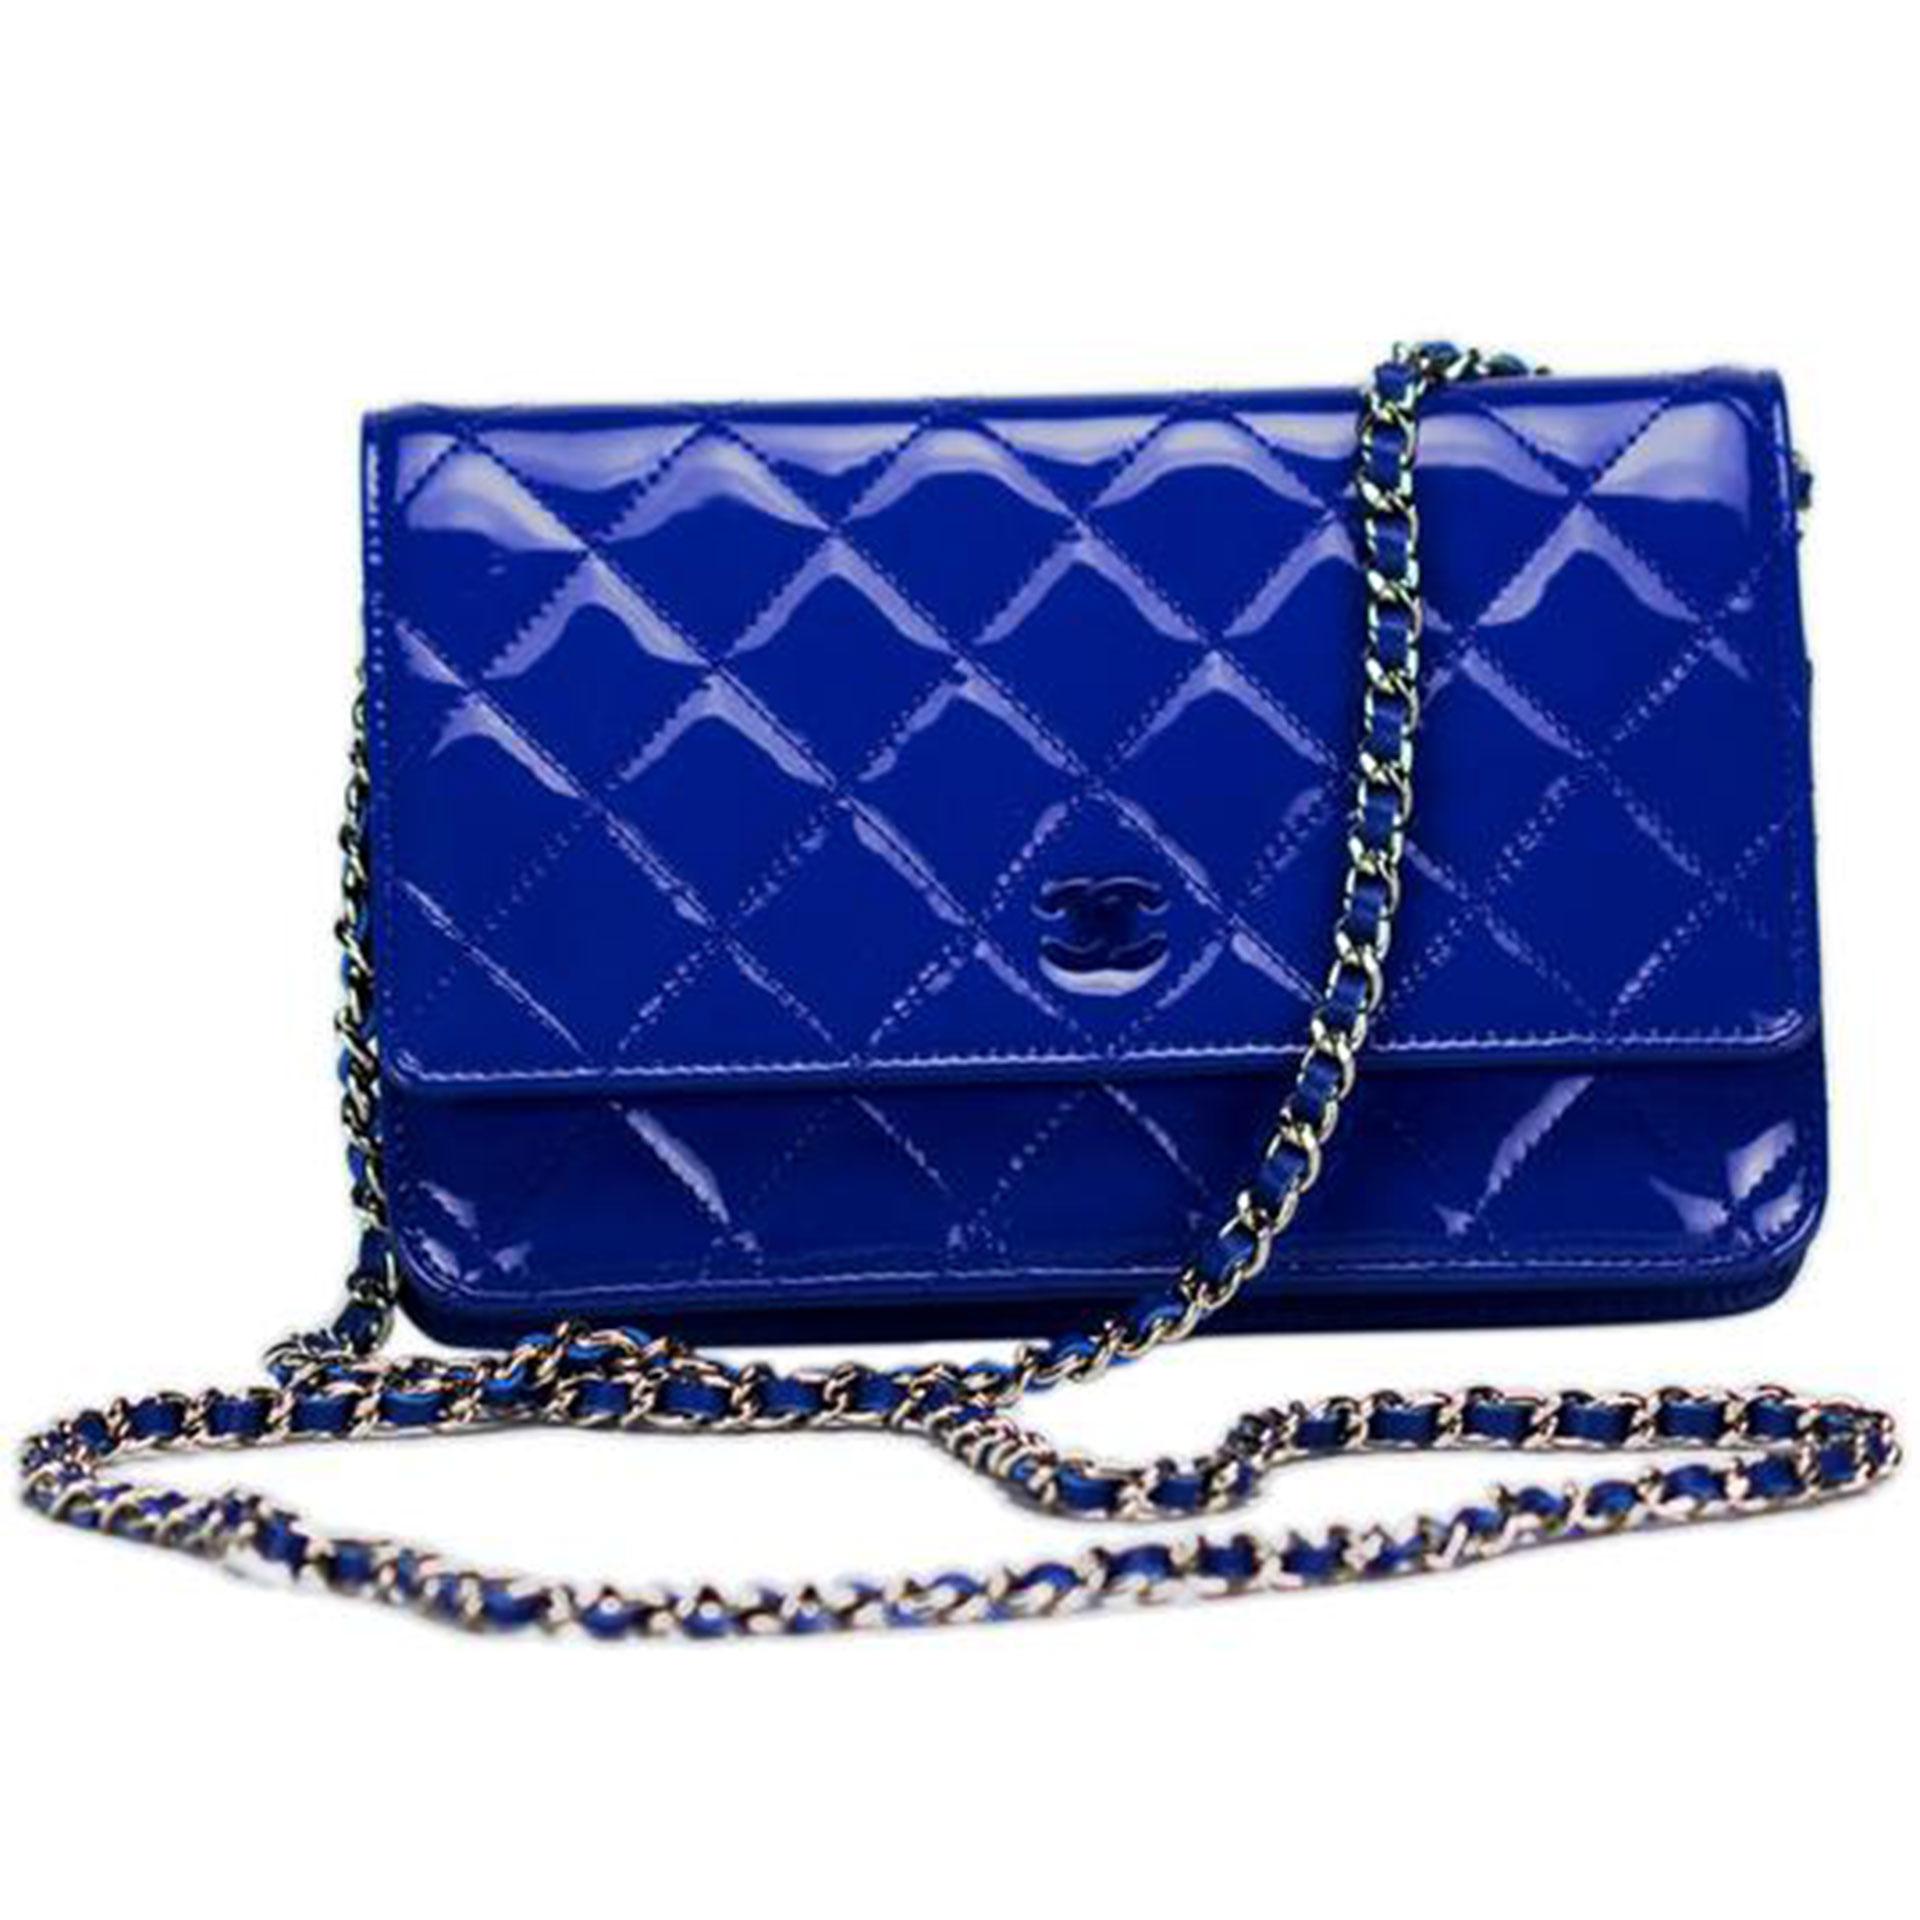 Rare Superman Blue Brand New Chanel 2014 Wallet on Chain WOC Patent Leather Bag For Sale 2